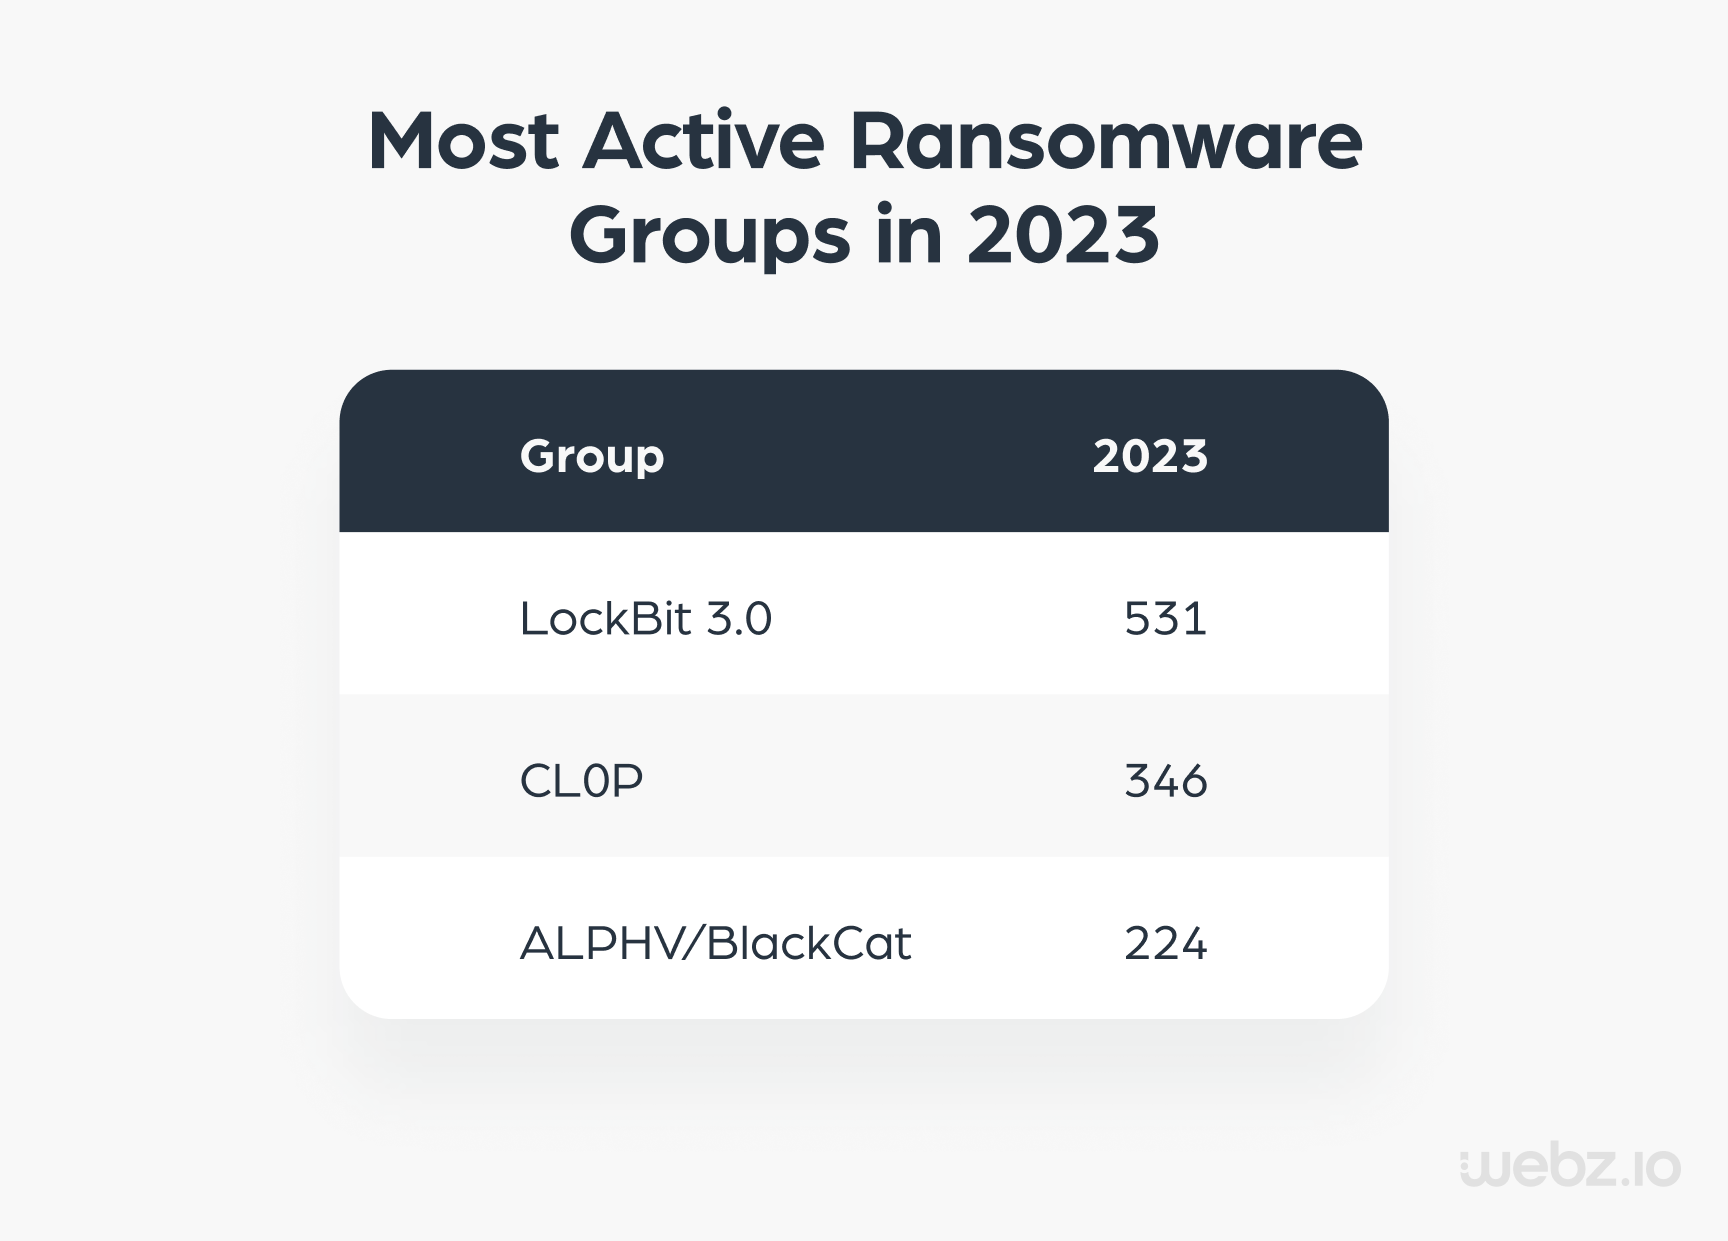 The number of claimed attacks by the top ransomware groups in 2023, Credit: inSicurezzaDigitale